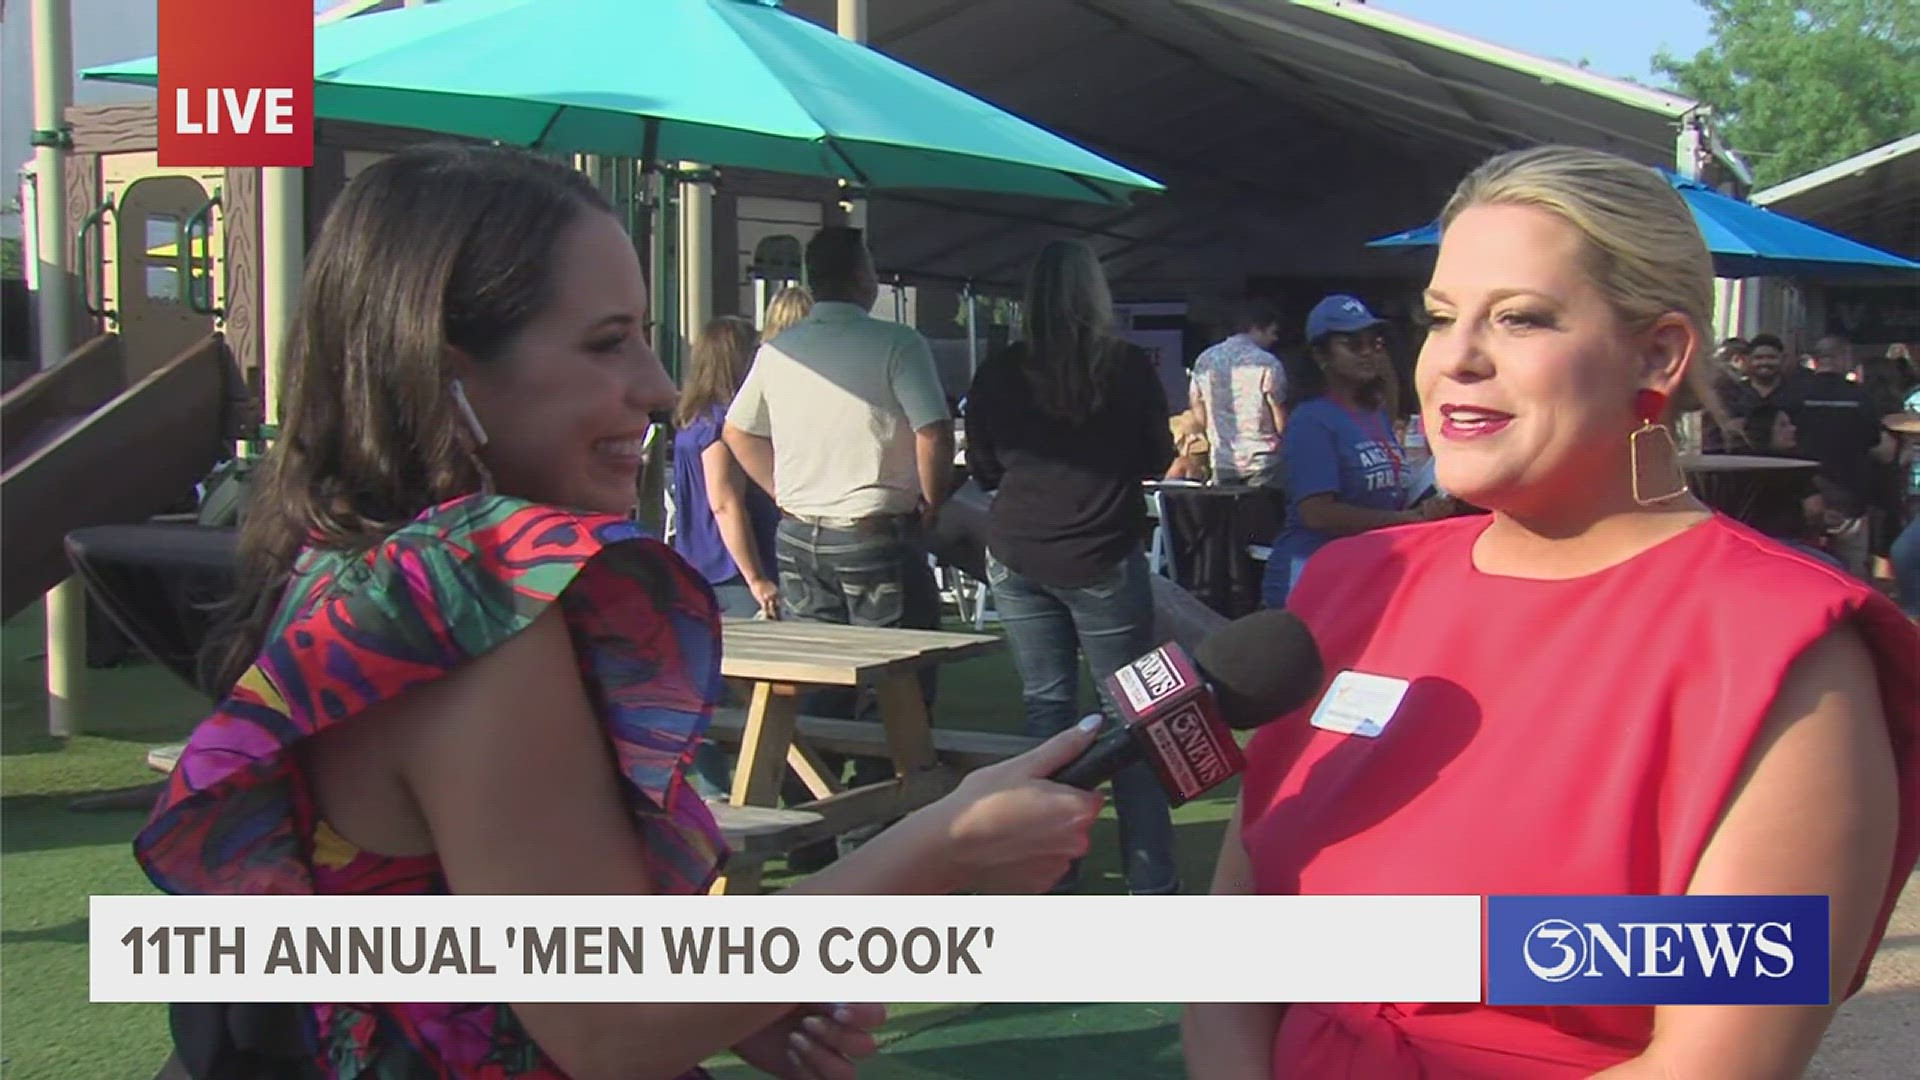 The 11th annual 'Men Who Cook' event, like the name suggests, incorporates teams of men for a friendly yet competitive cook-off! All to support the local RMHC.